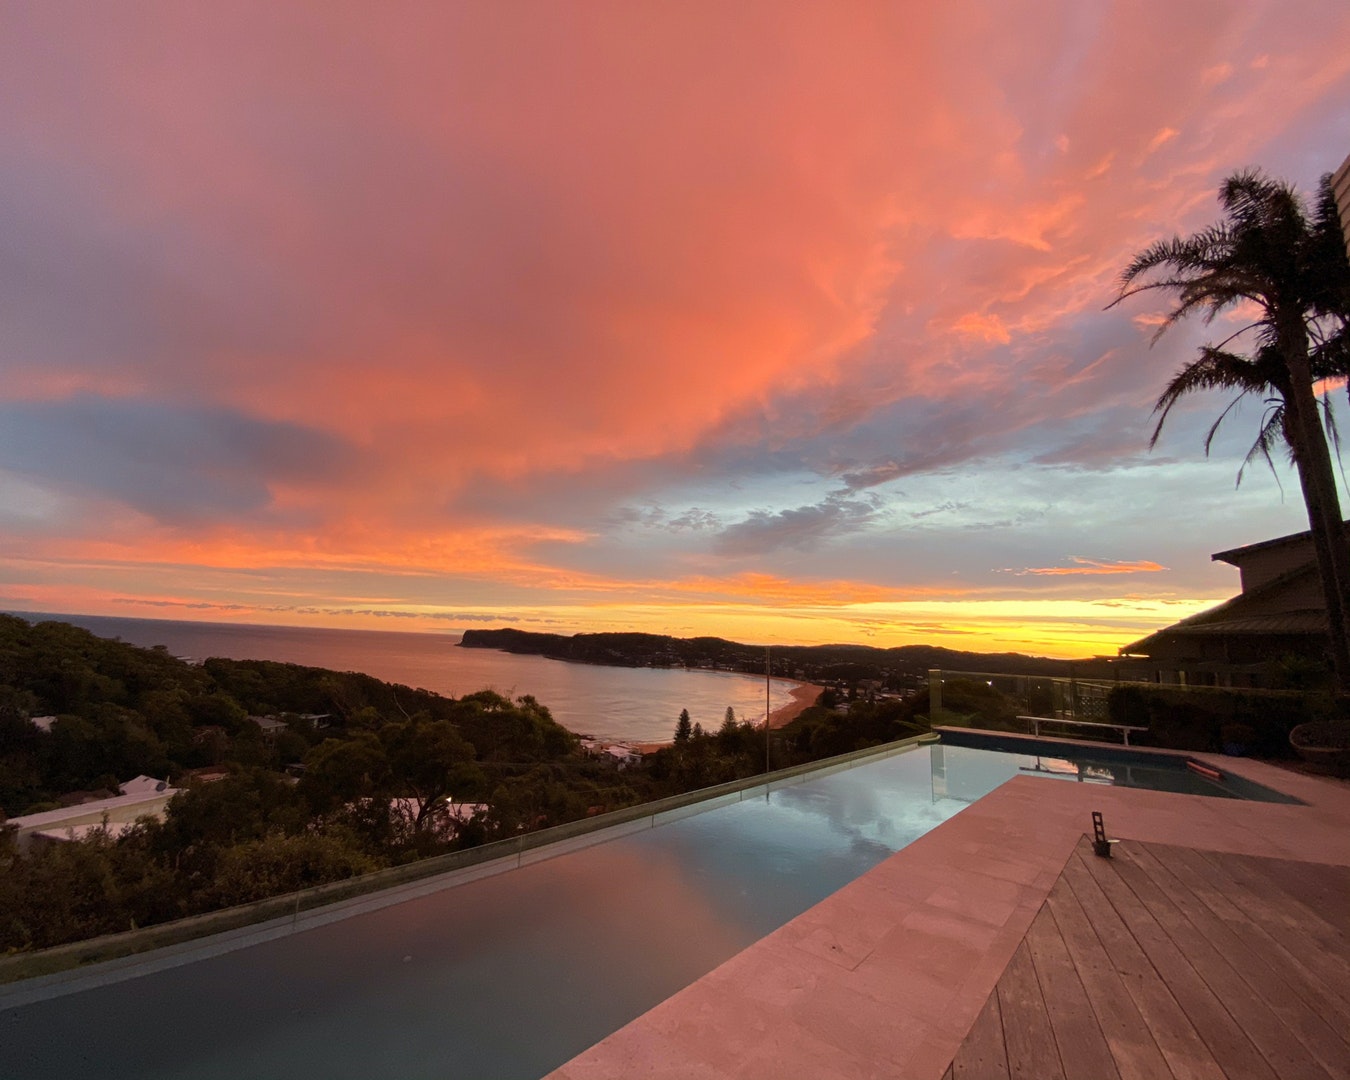 The infinity pool at The Vue, which is some of the best accommodation on the Central Coast